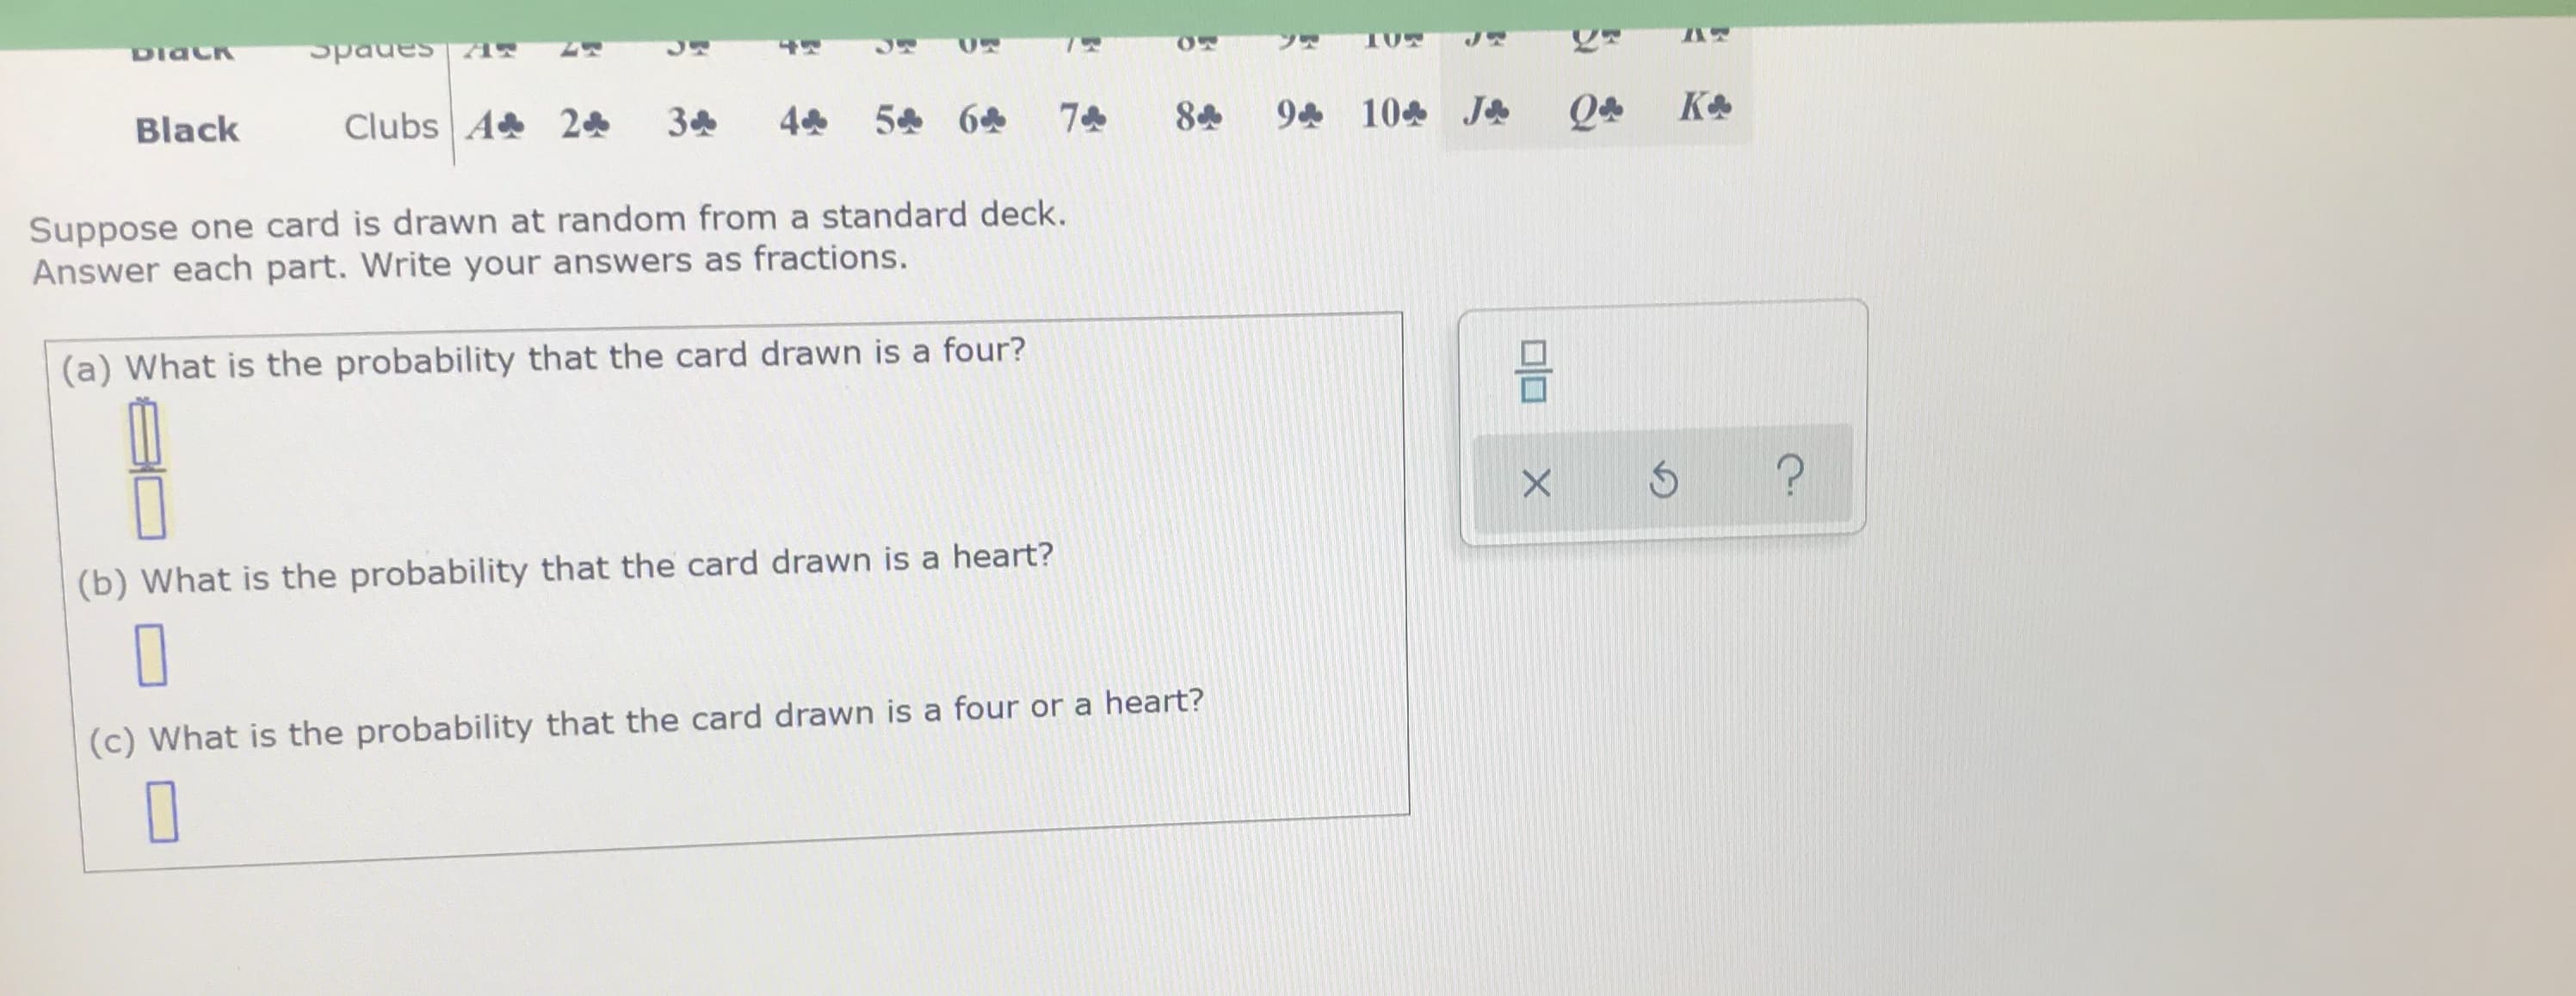 Suppose one card is drawn at random from a standard deck.
Answer each part. Write your answers as fractions.
(a) What is the probability that the card drawn is a four?
(b) What is the probability that the card drawn is a heart?
(c) What is the probability that the card drawn is a four or a heart?
